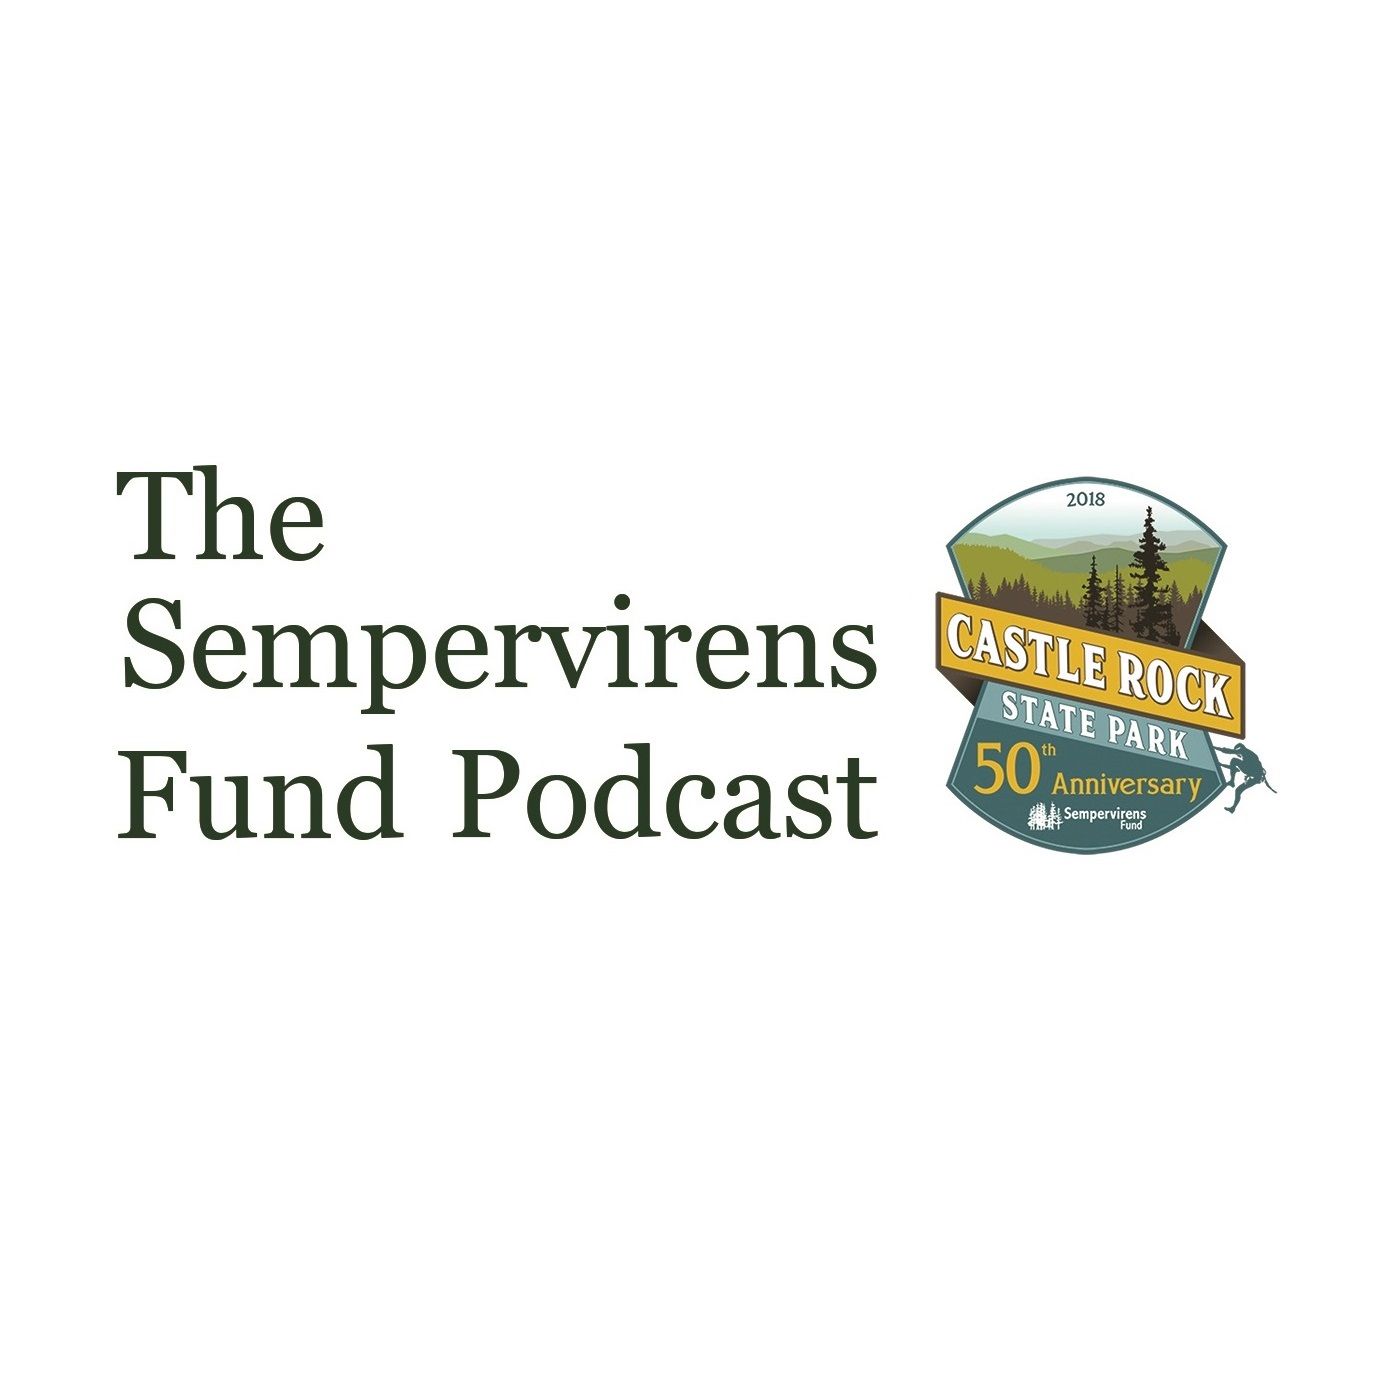 The Sempervirens Fund Podcast